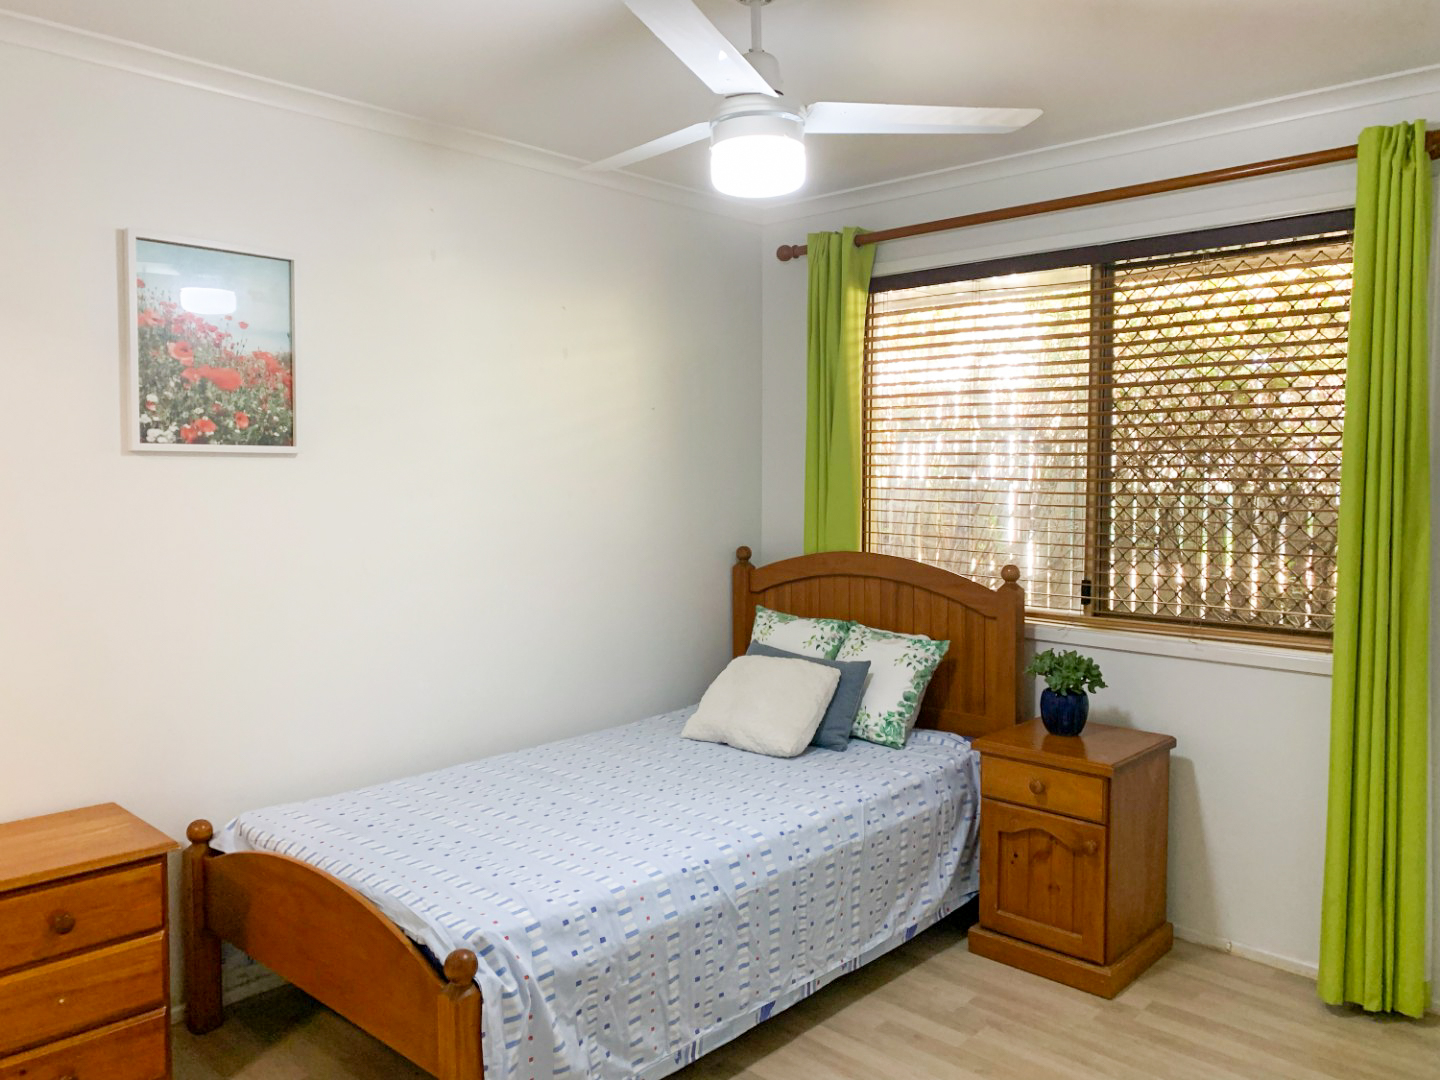 Bedroom with a single bed in , ceiling fan and green curtains